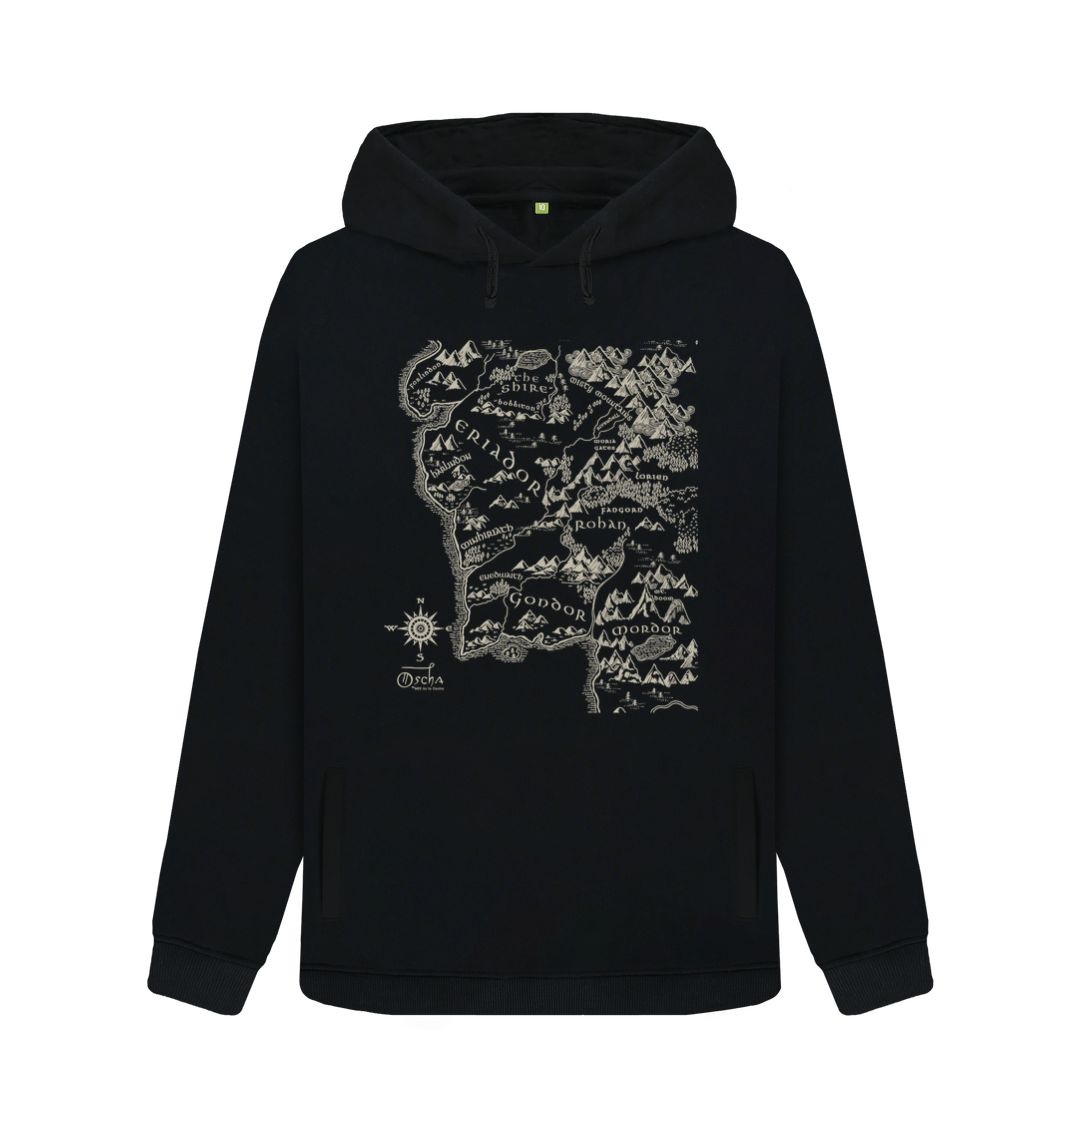 Black Realm of MIDDLE-EARTH\u2122 Women's Pullover Hoodie